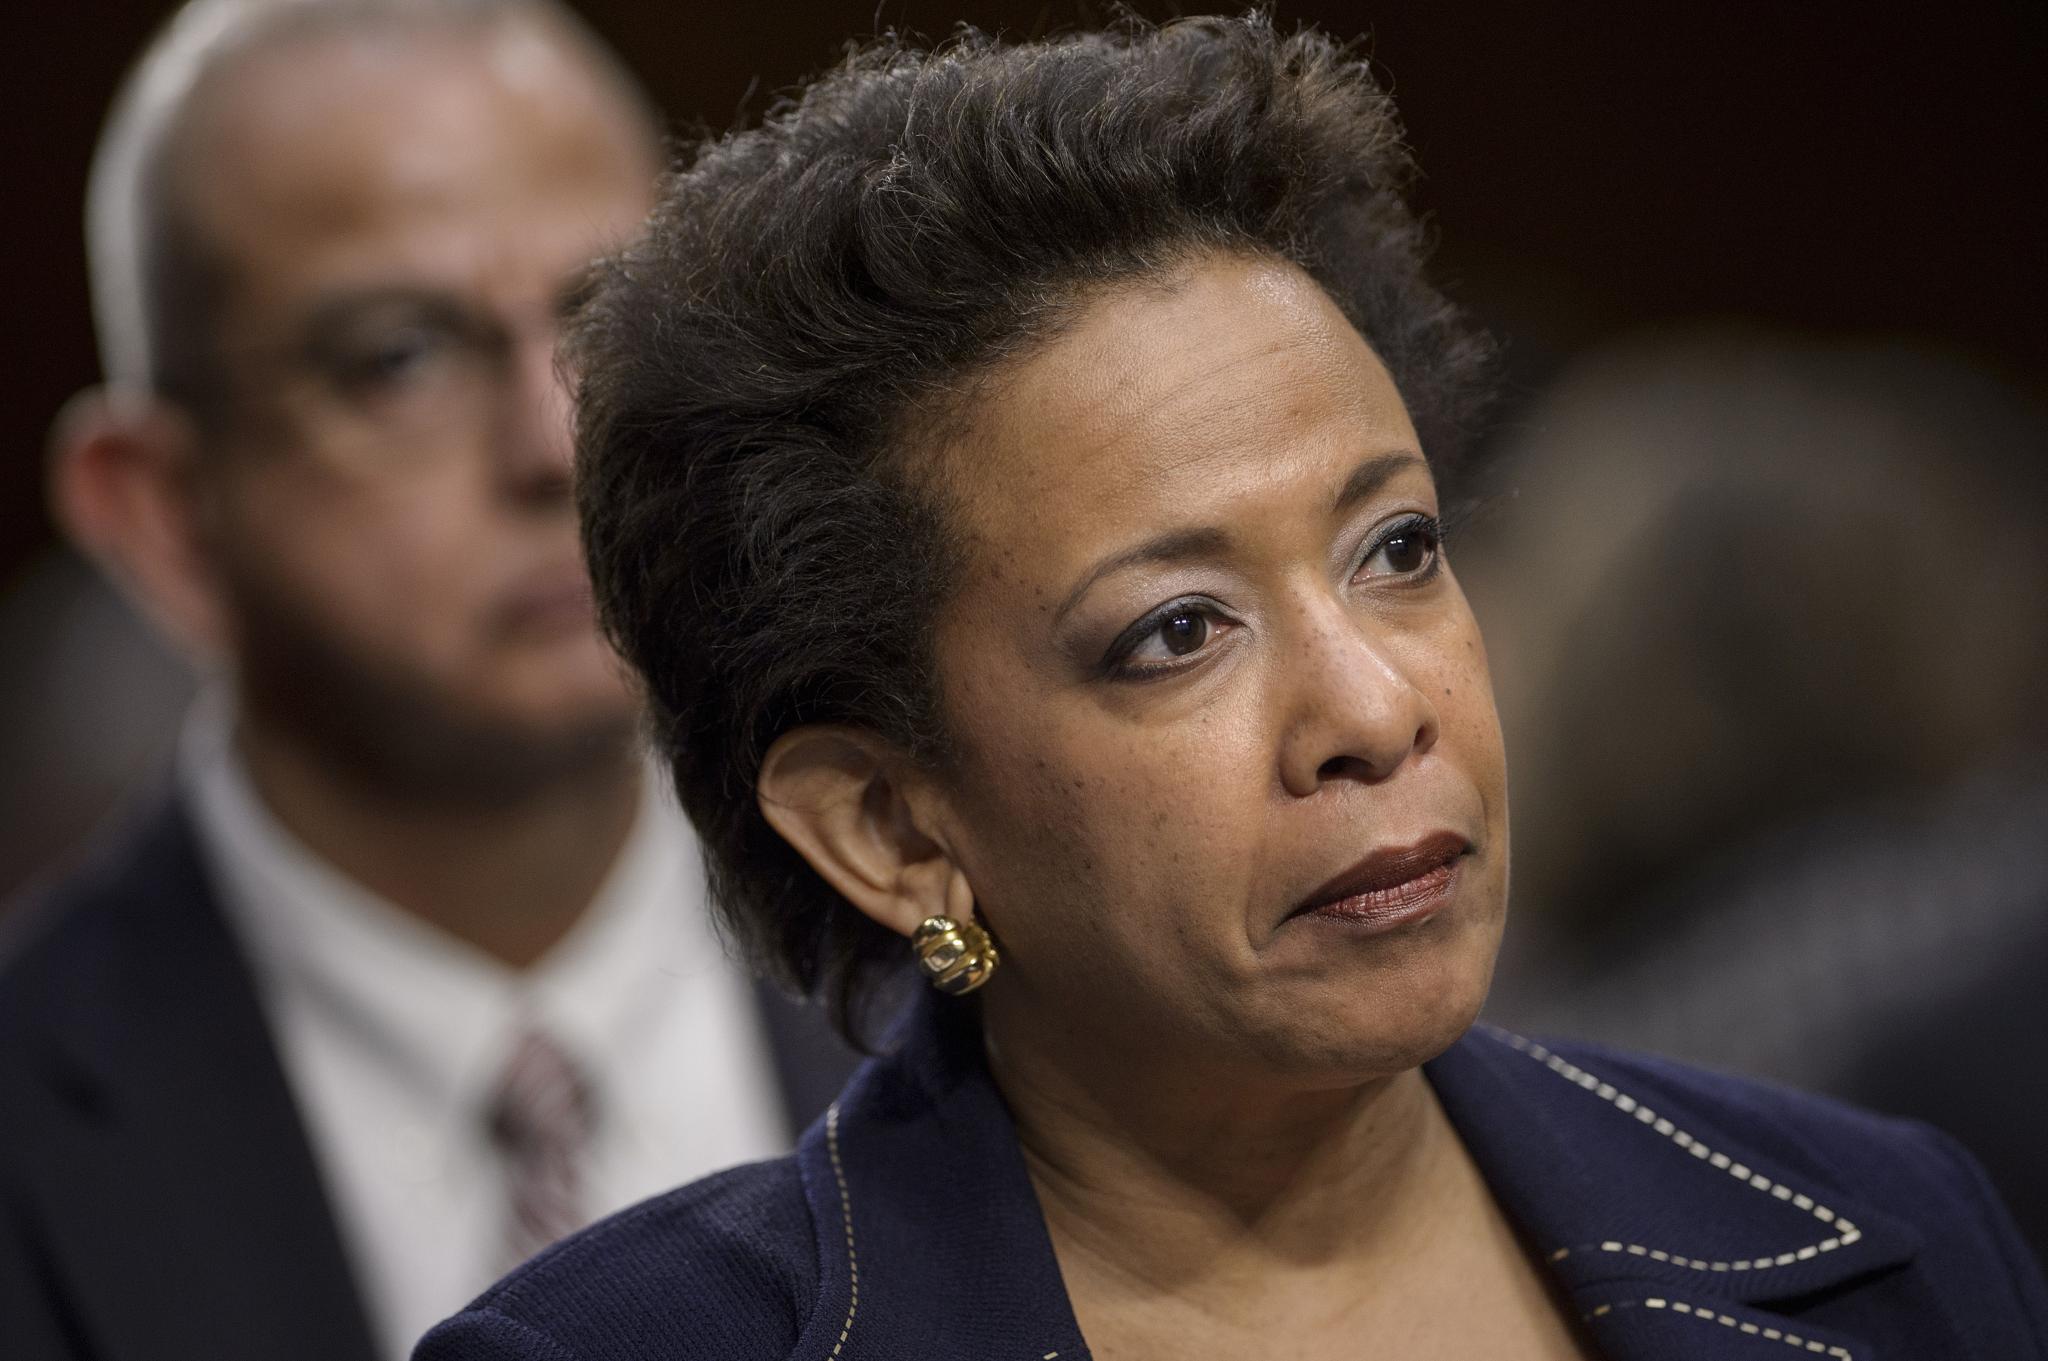 Loretta Lynch Speaks Out on Sandra Bland: “I Hope This Can Bring Minorities' Frustration to Light”